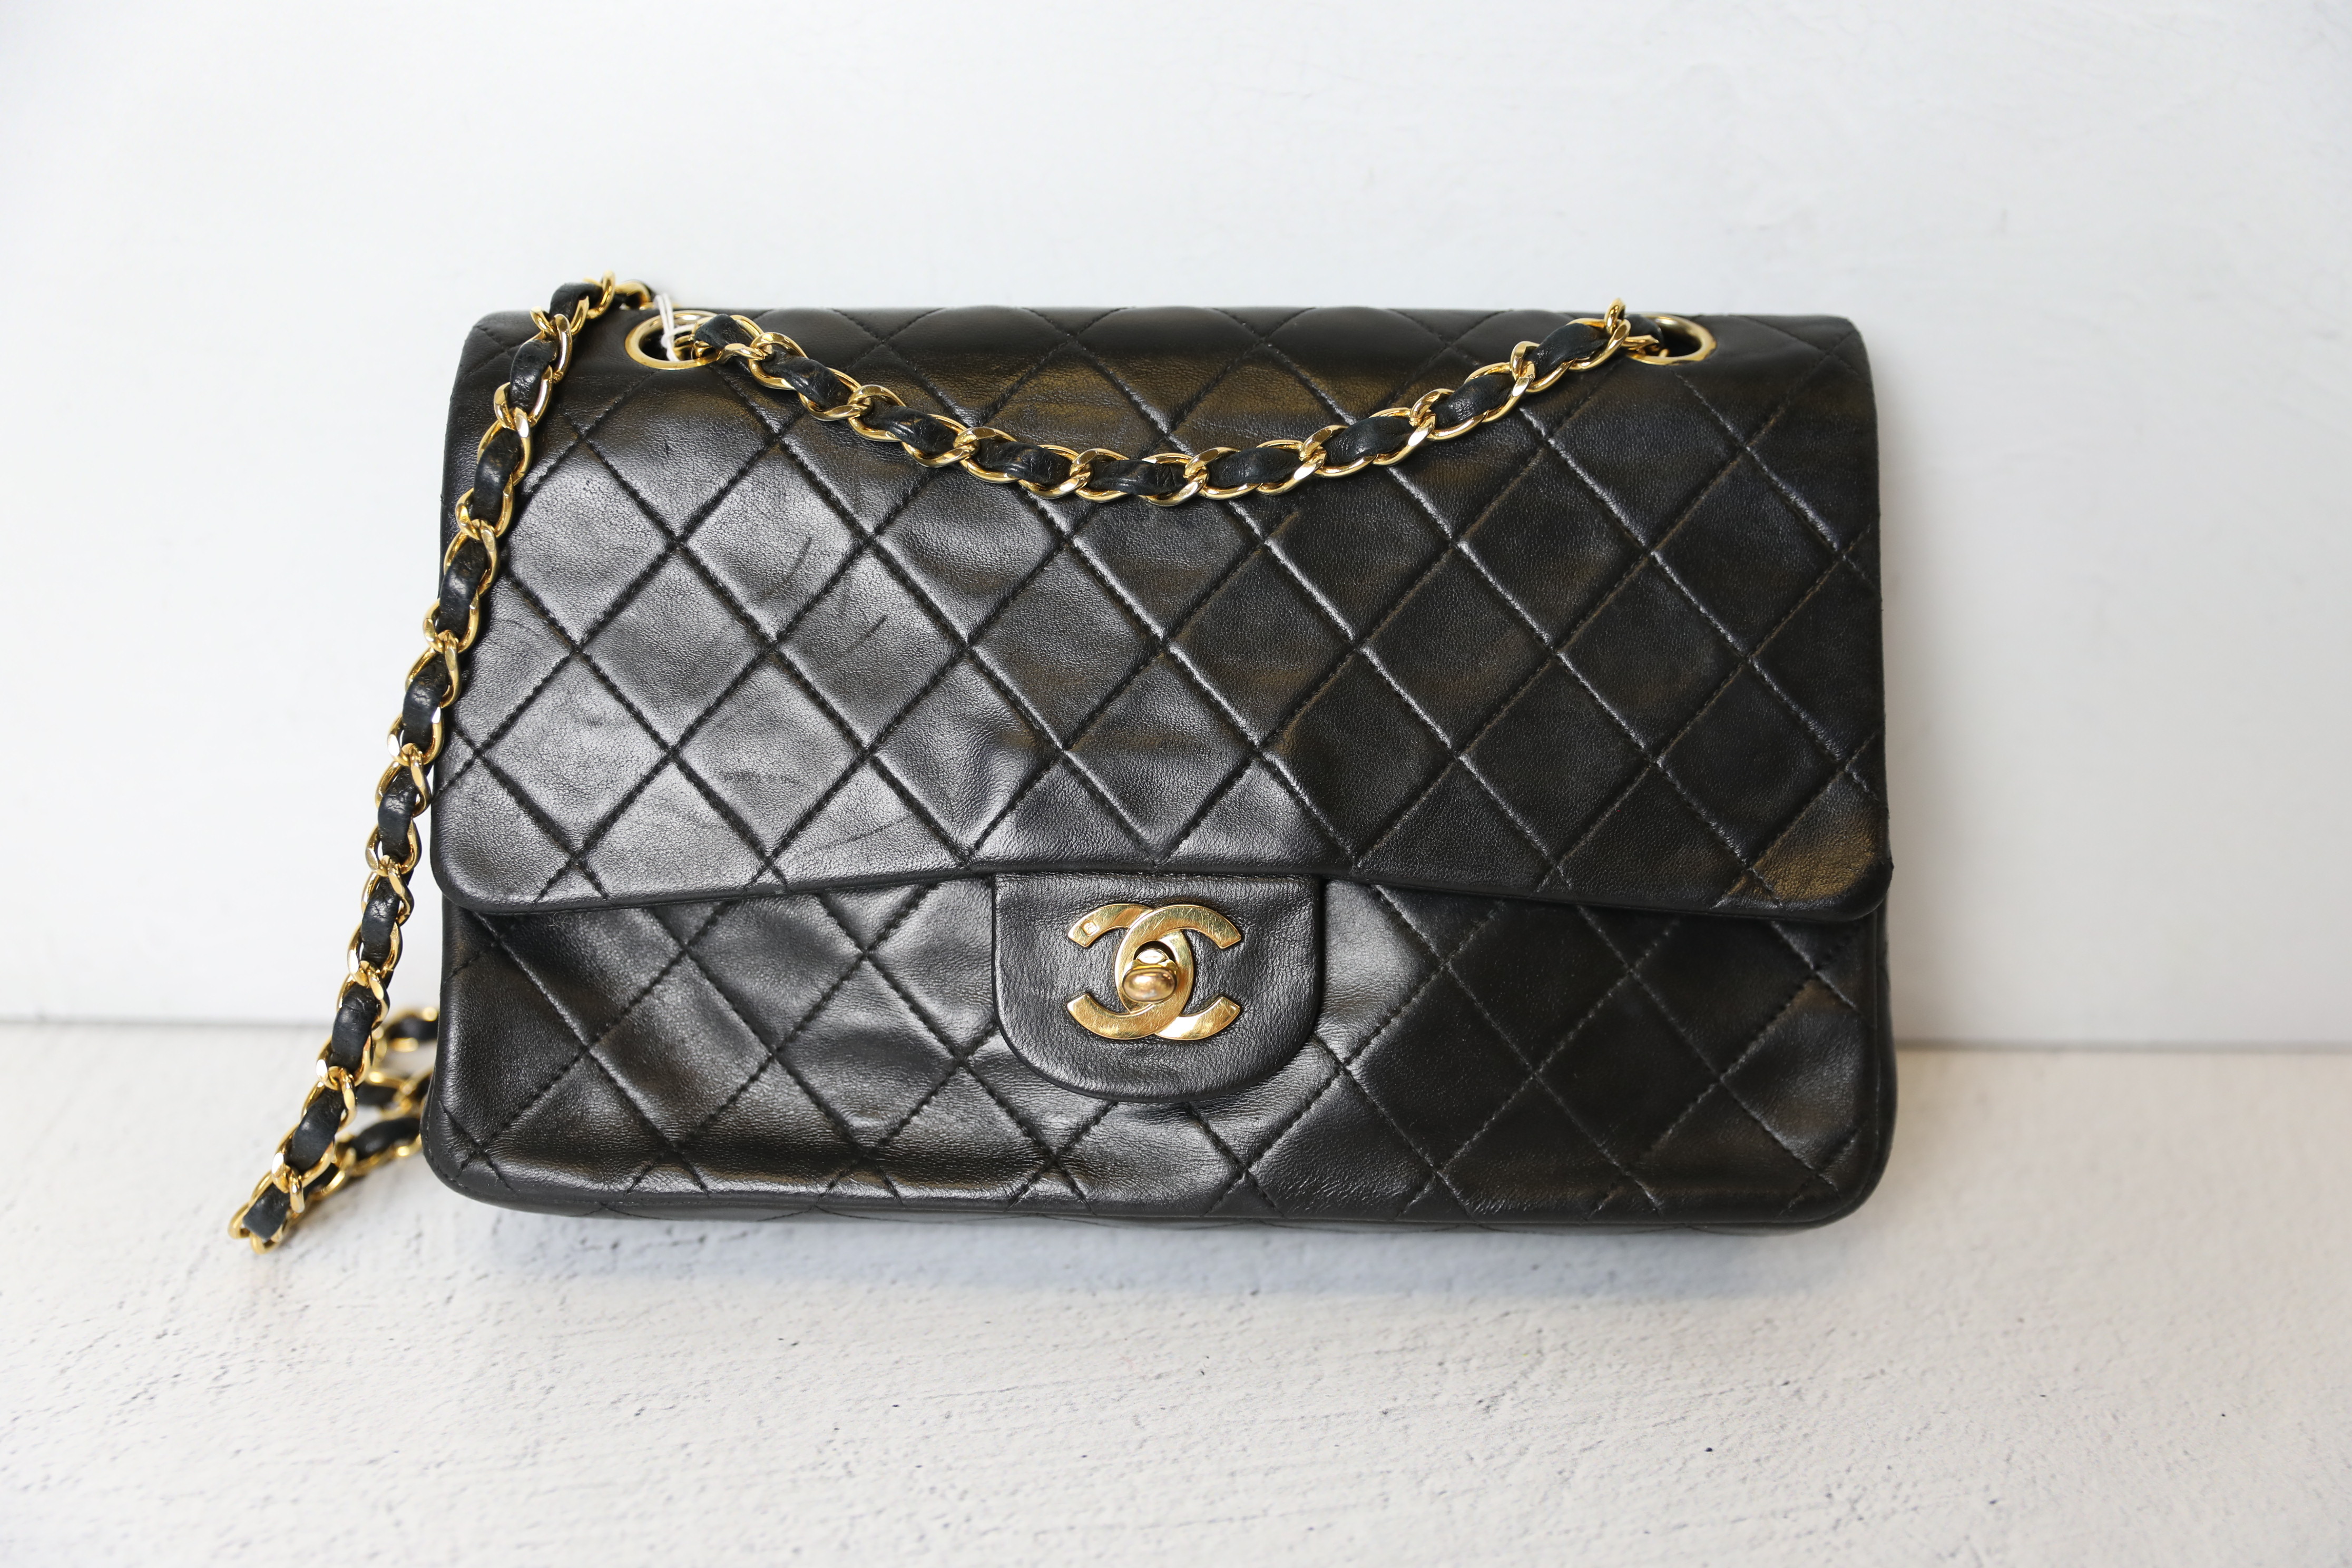 Chanel Vintage Medium Flap, Black Lambskin with Gold Hardware, Preowned in  Dustbag WA001 - Julia Rose Boston